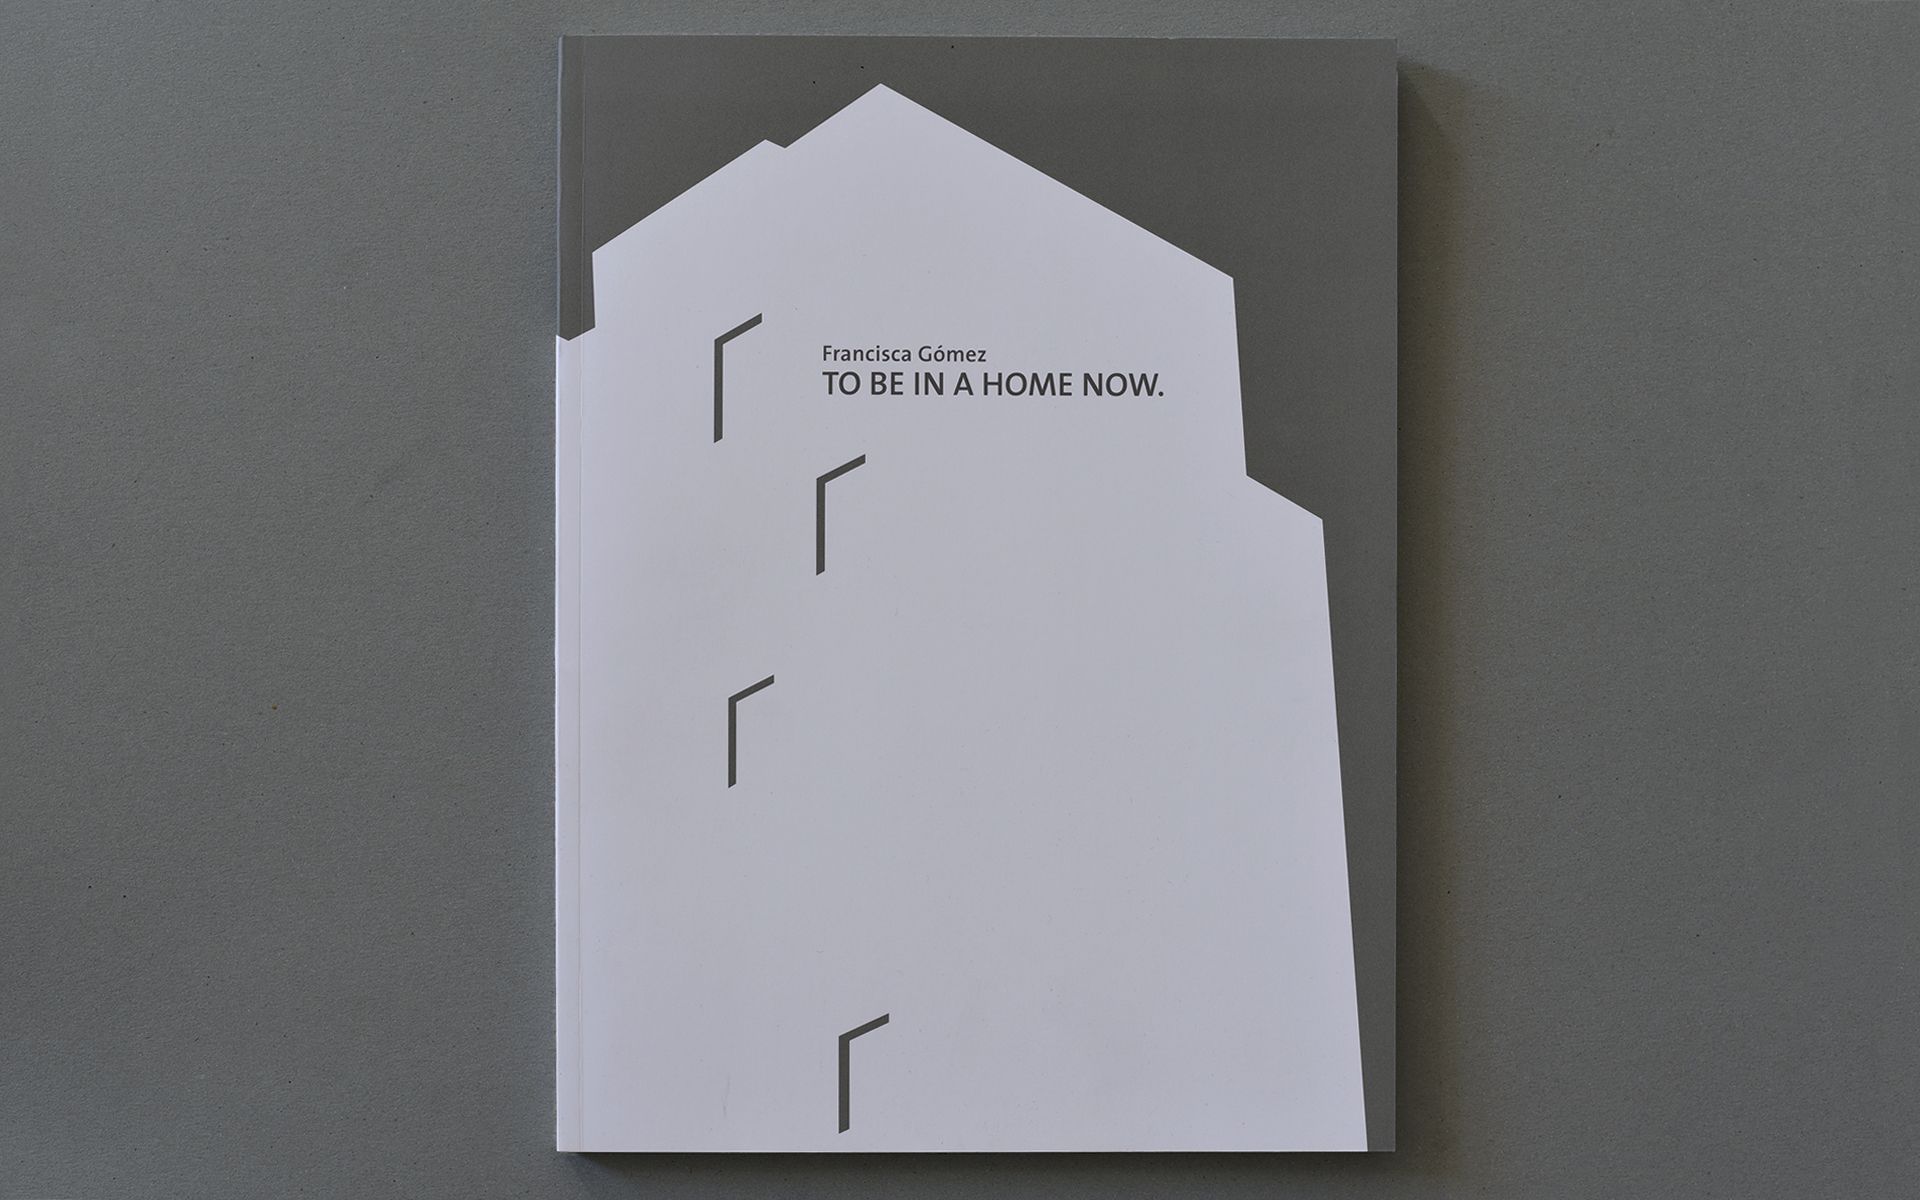 Katalog Francisca Gómez - To be in a Home now.